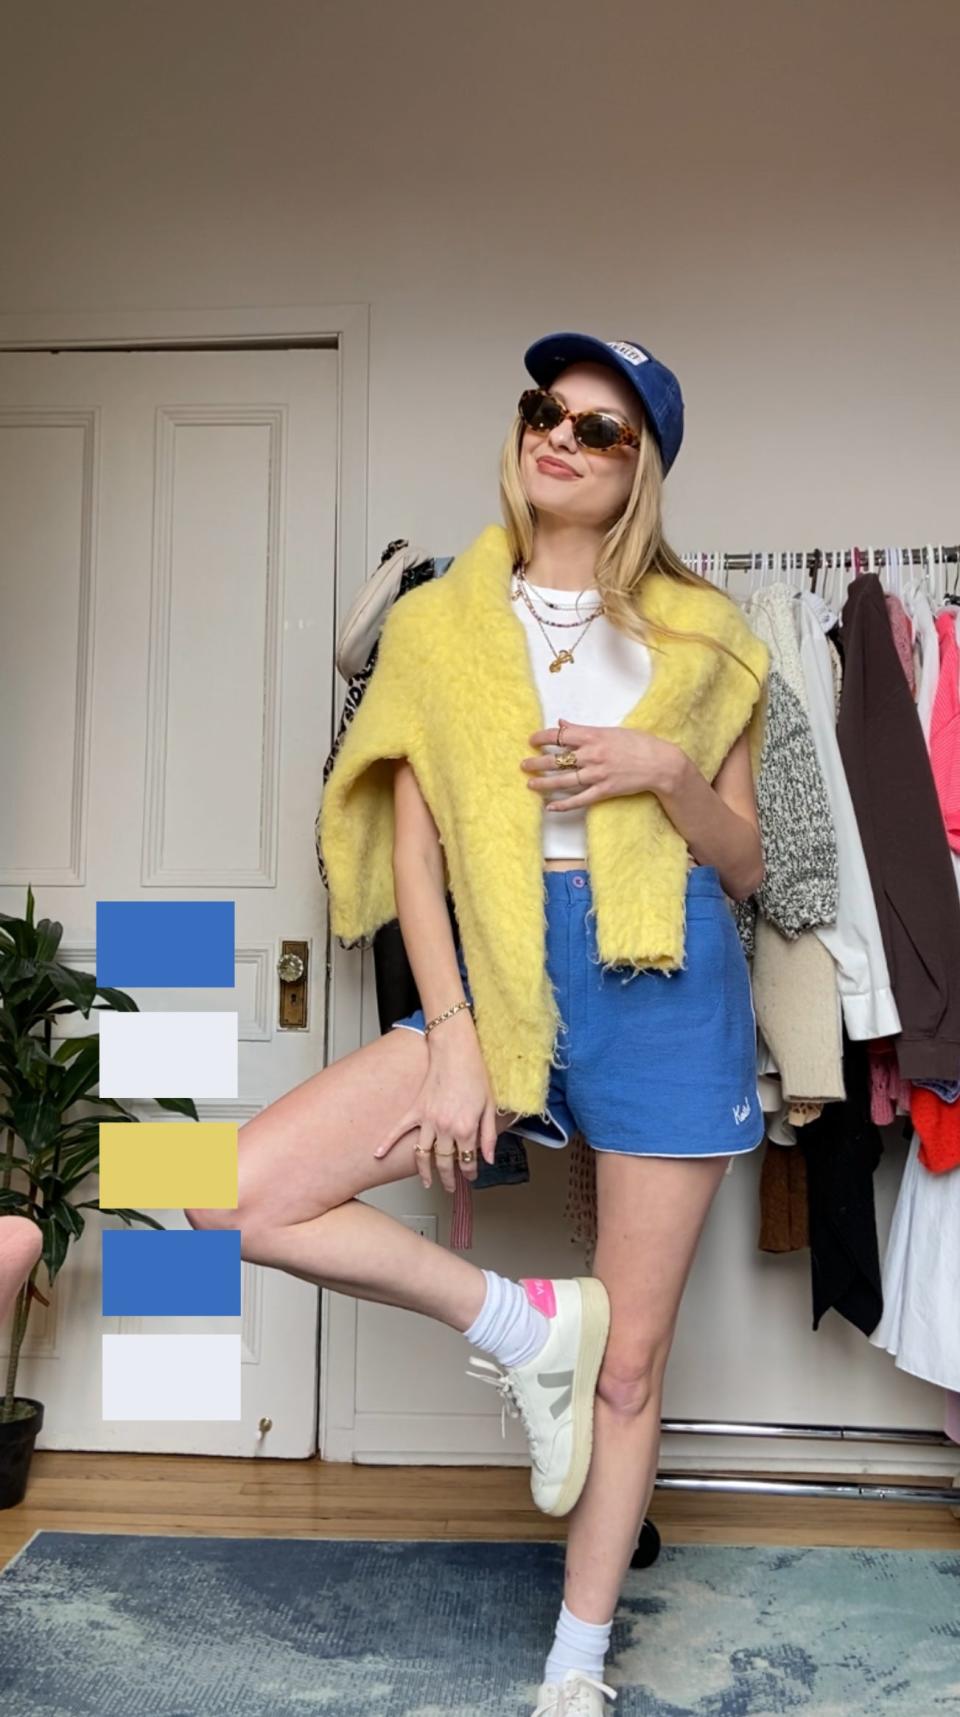 Woman in sunglasses and cap stands posing with one leg raised, wearing a yellow furry jacket and denim shorts